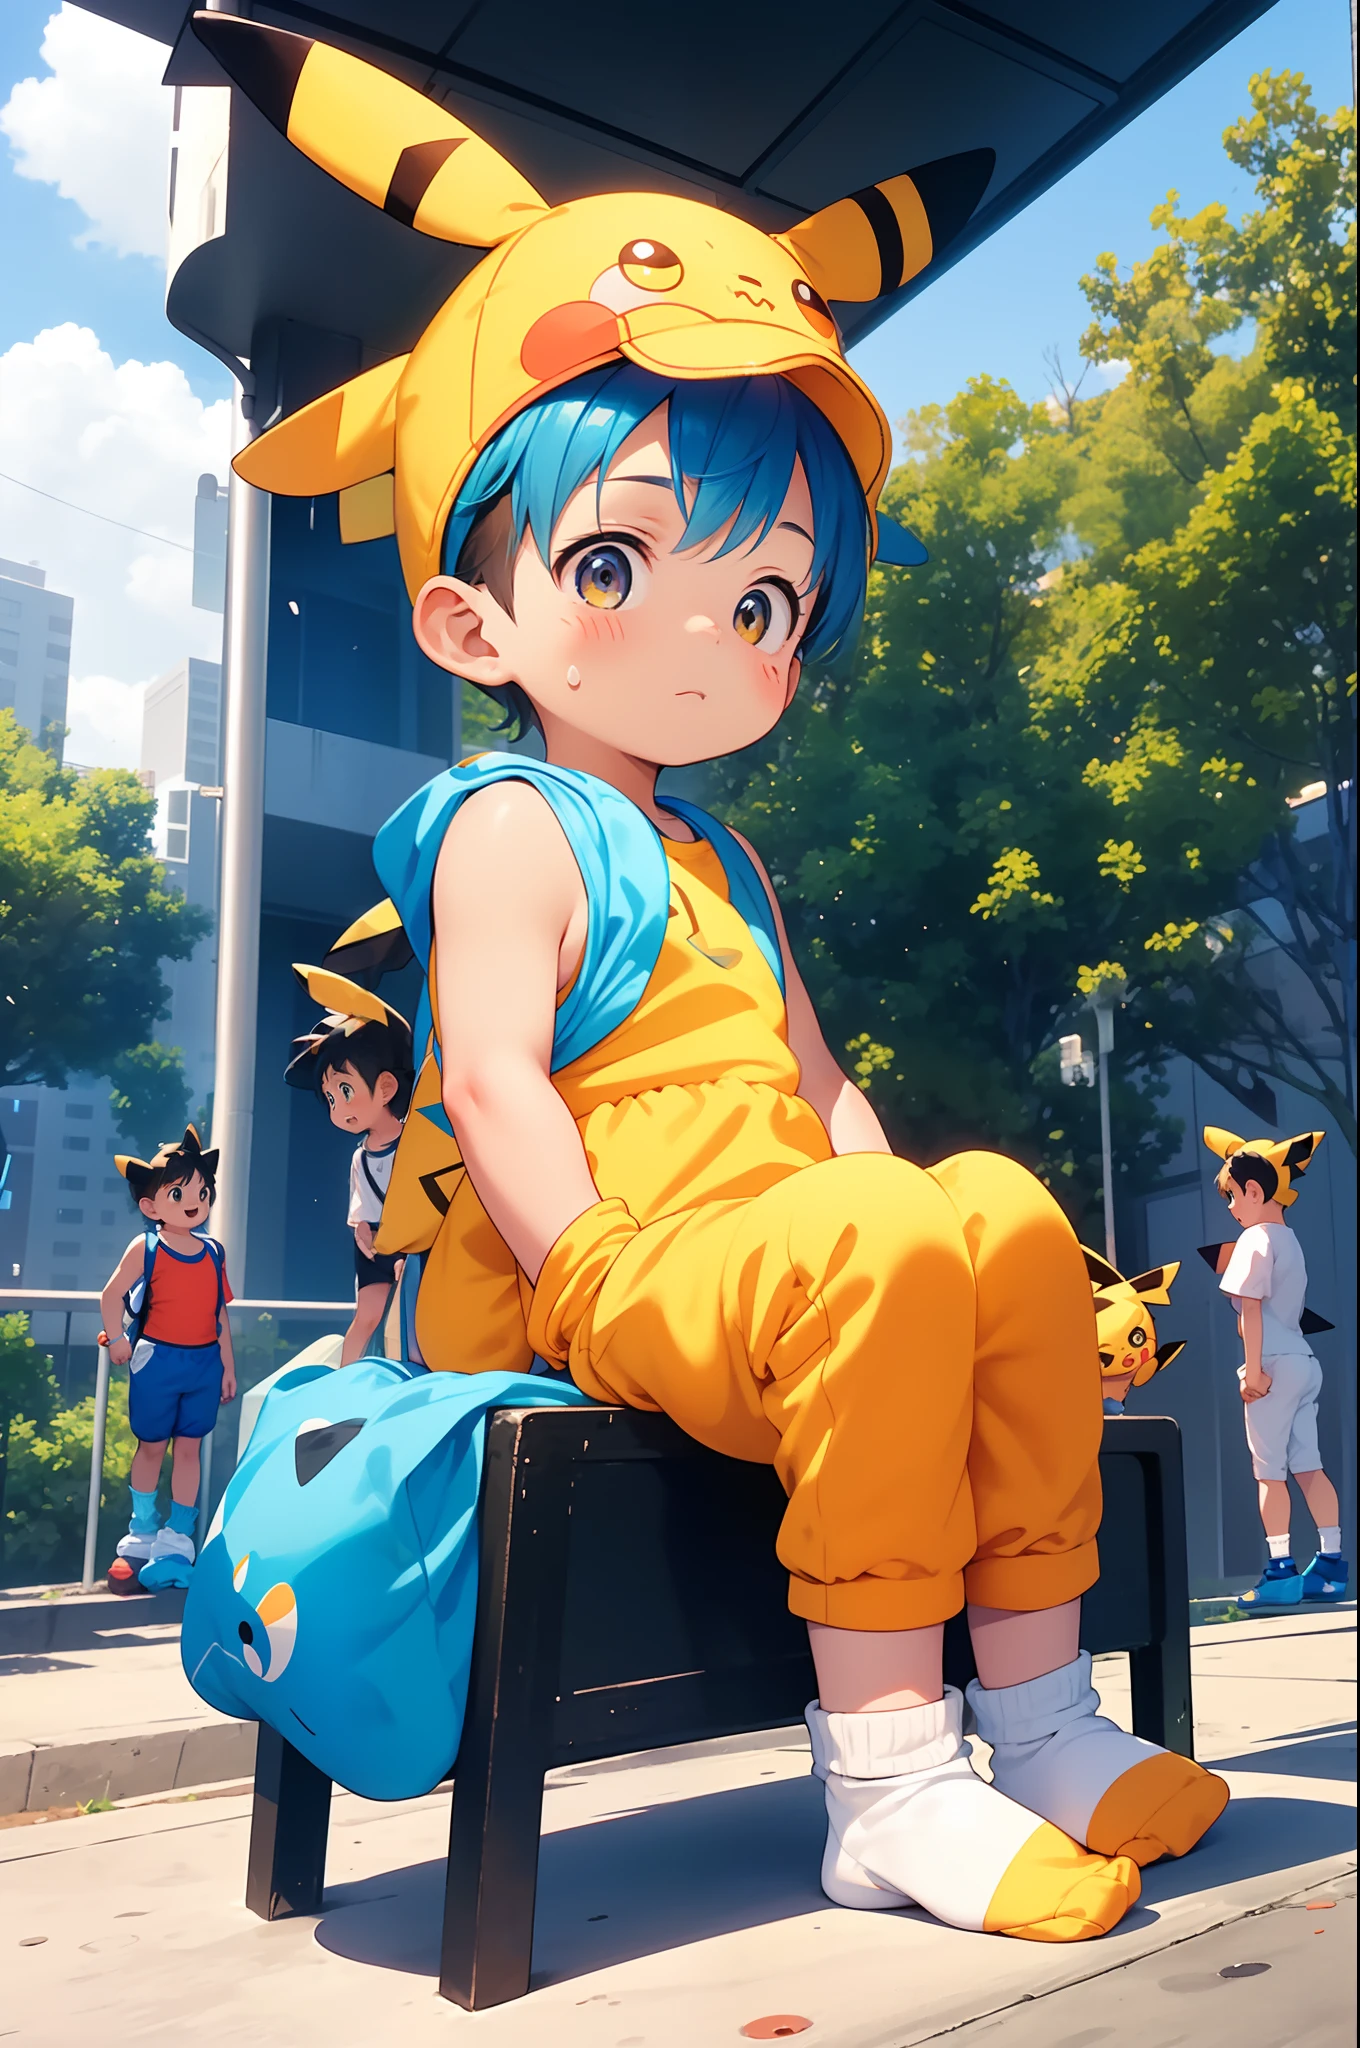 chubby Little chico with blue hair and shiny orange eyes and yellow medias wearing a Disfraz de Pikachu sitting on a bench in a park, joven, chico, , pequeño, niño pequeño, (niño:1.4), (chico:1.4), (shota:1.4), (pantalones deportivos:1.4), (Disfraz de Pikachu:1.6), (medias:1.8),